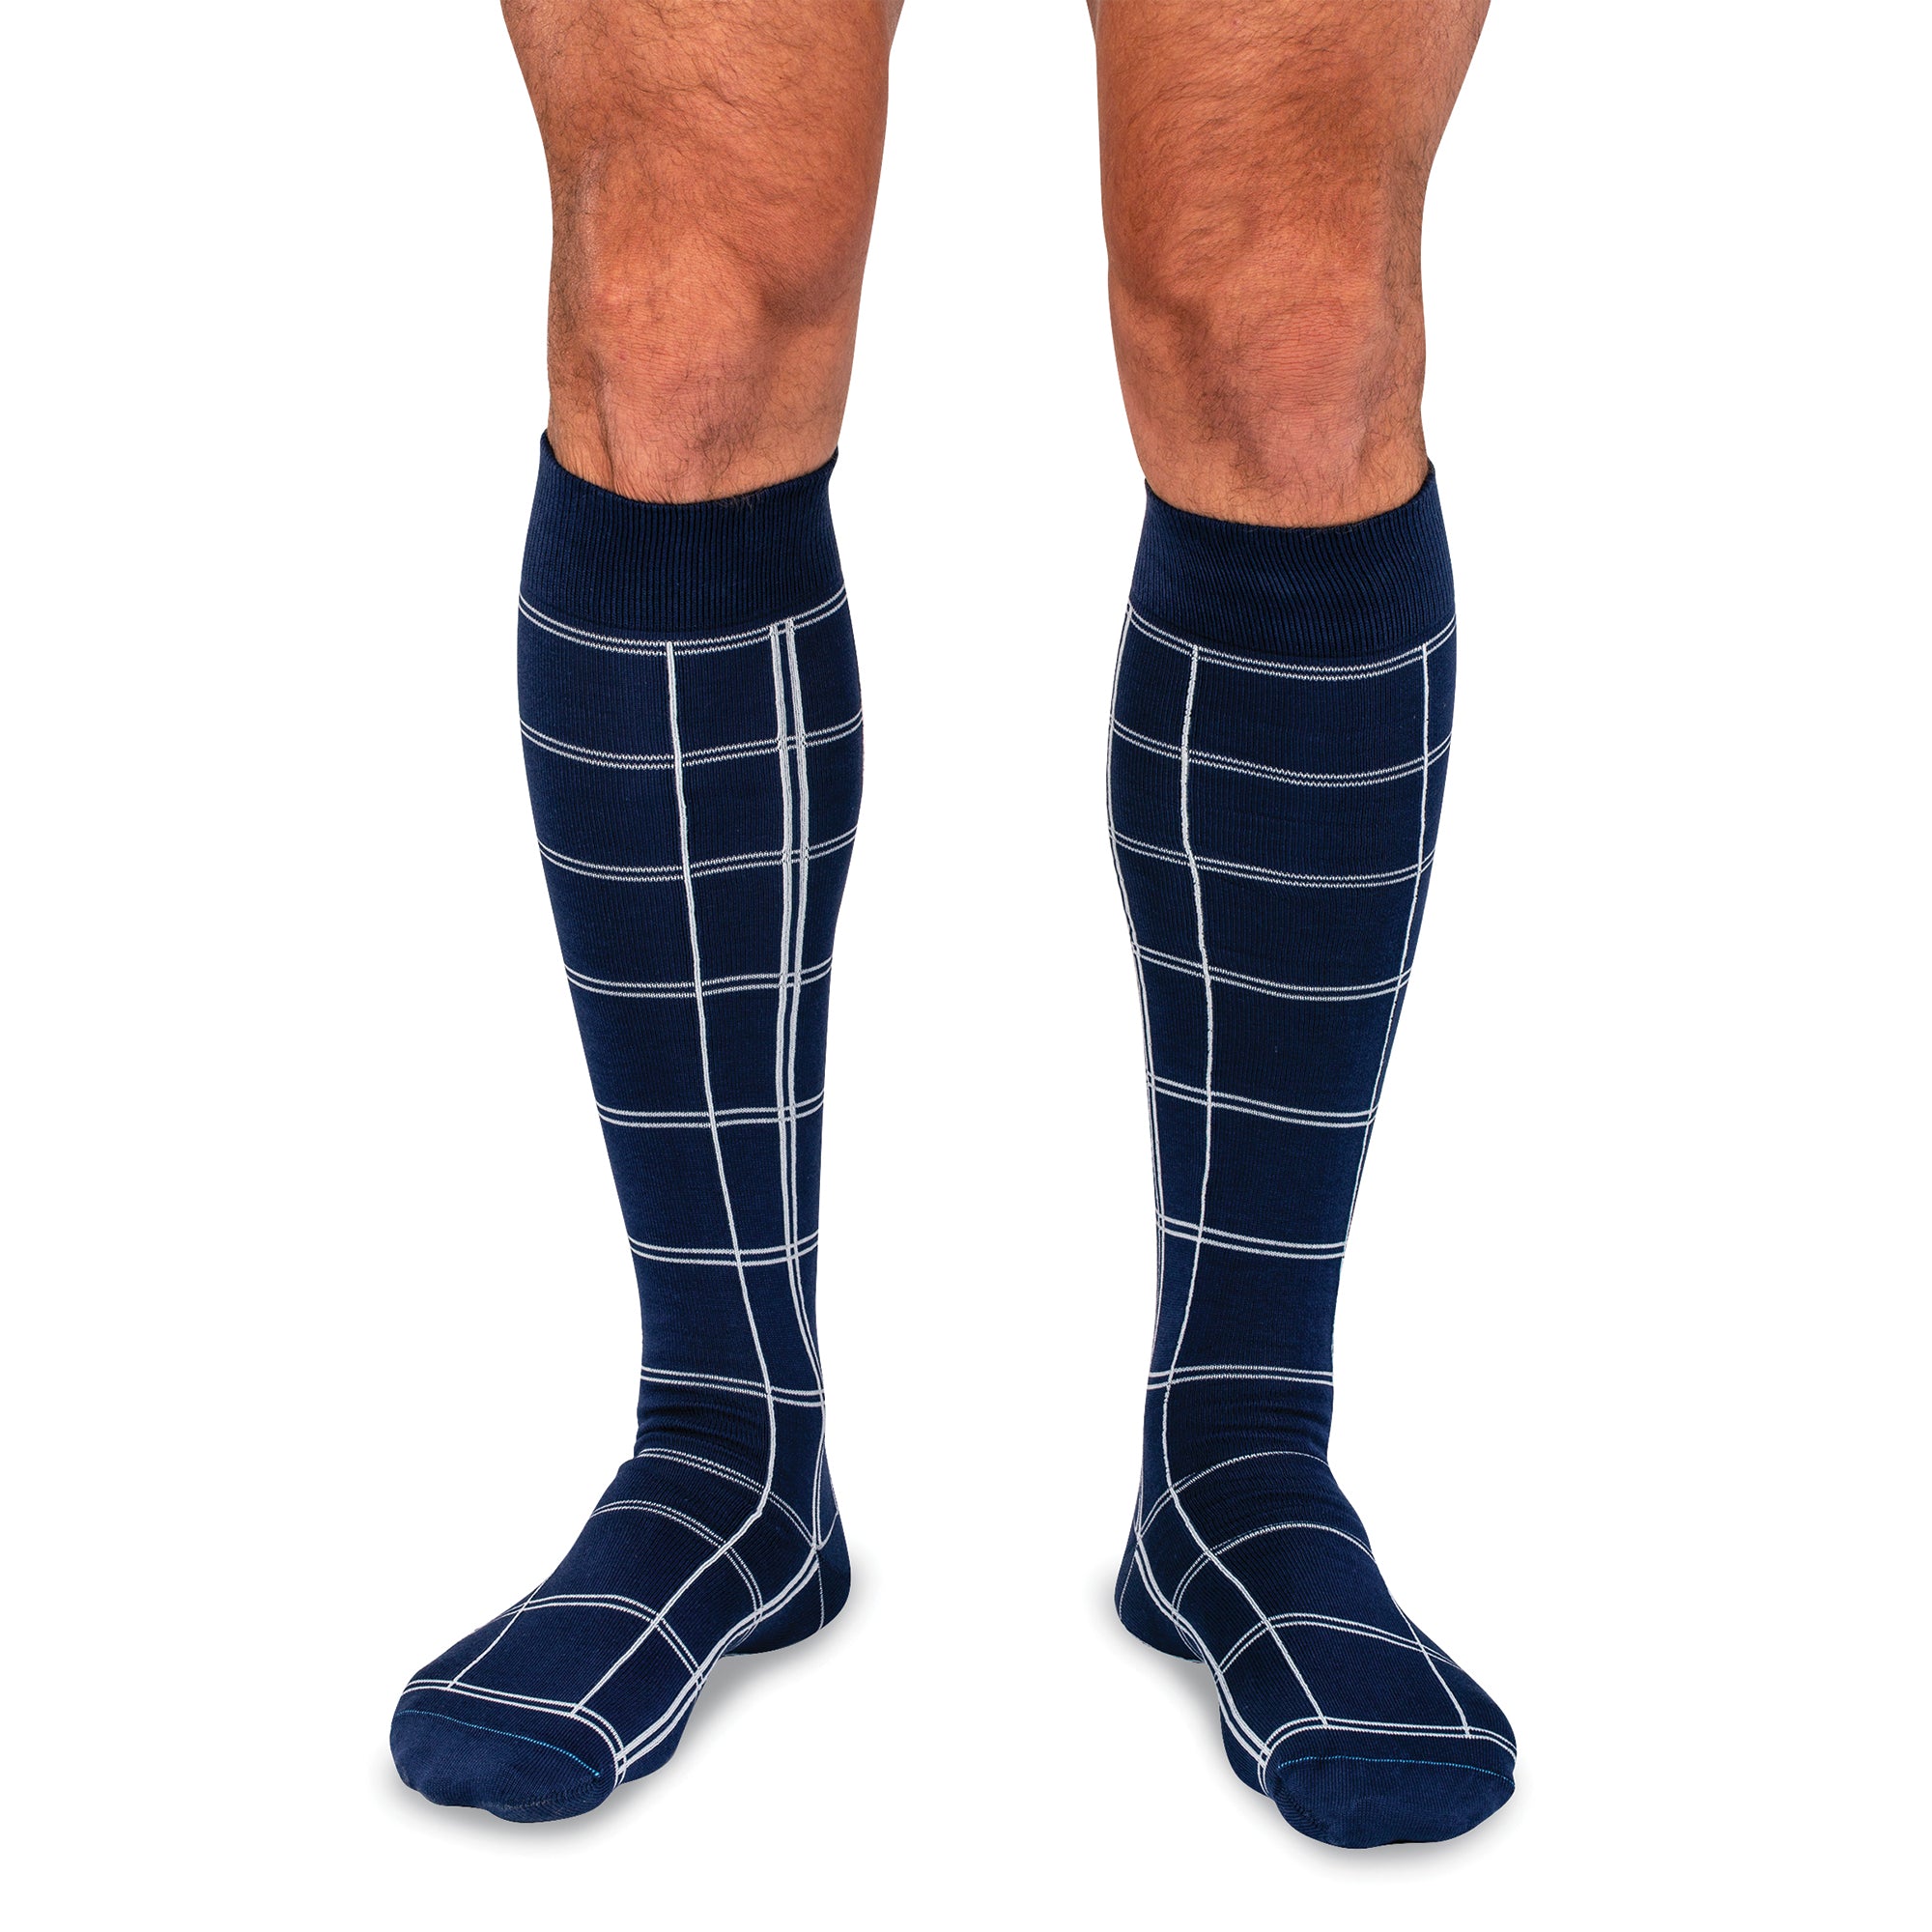 model wearing navy over the calf dress socks with a windowpane motif